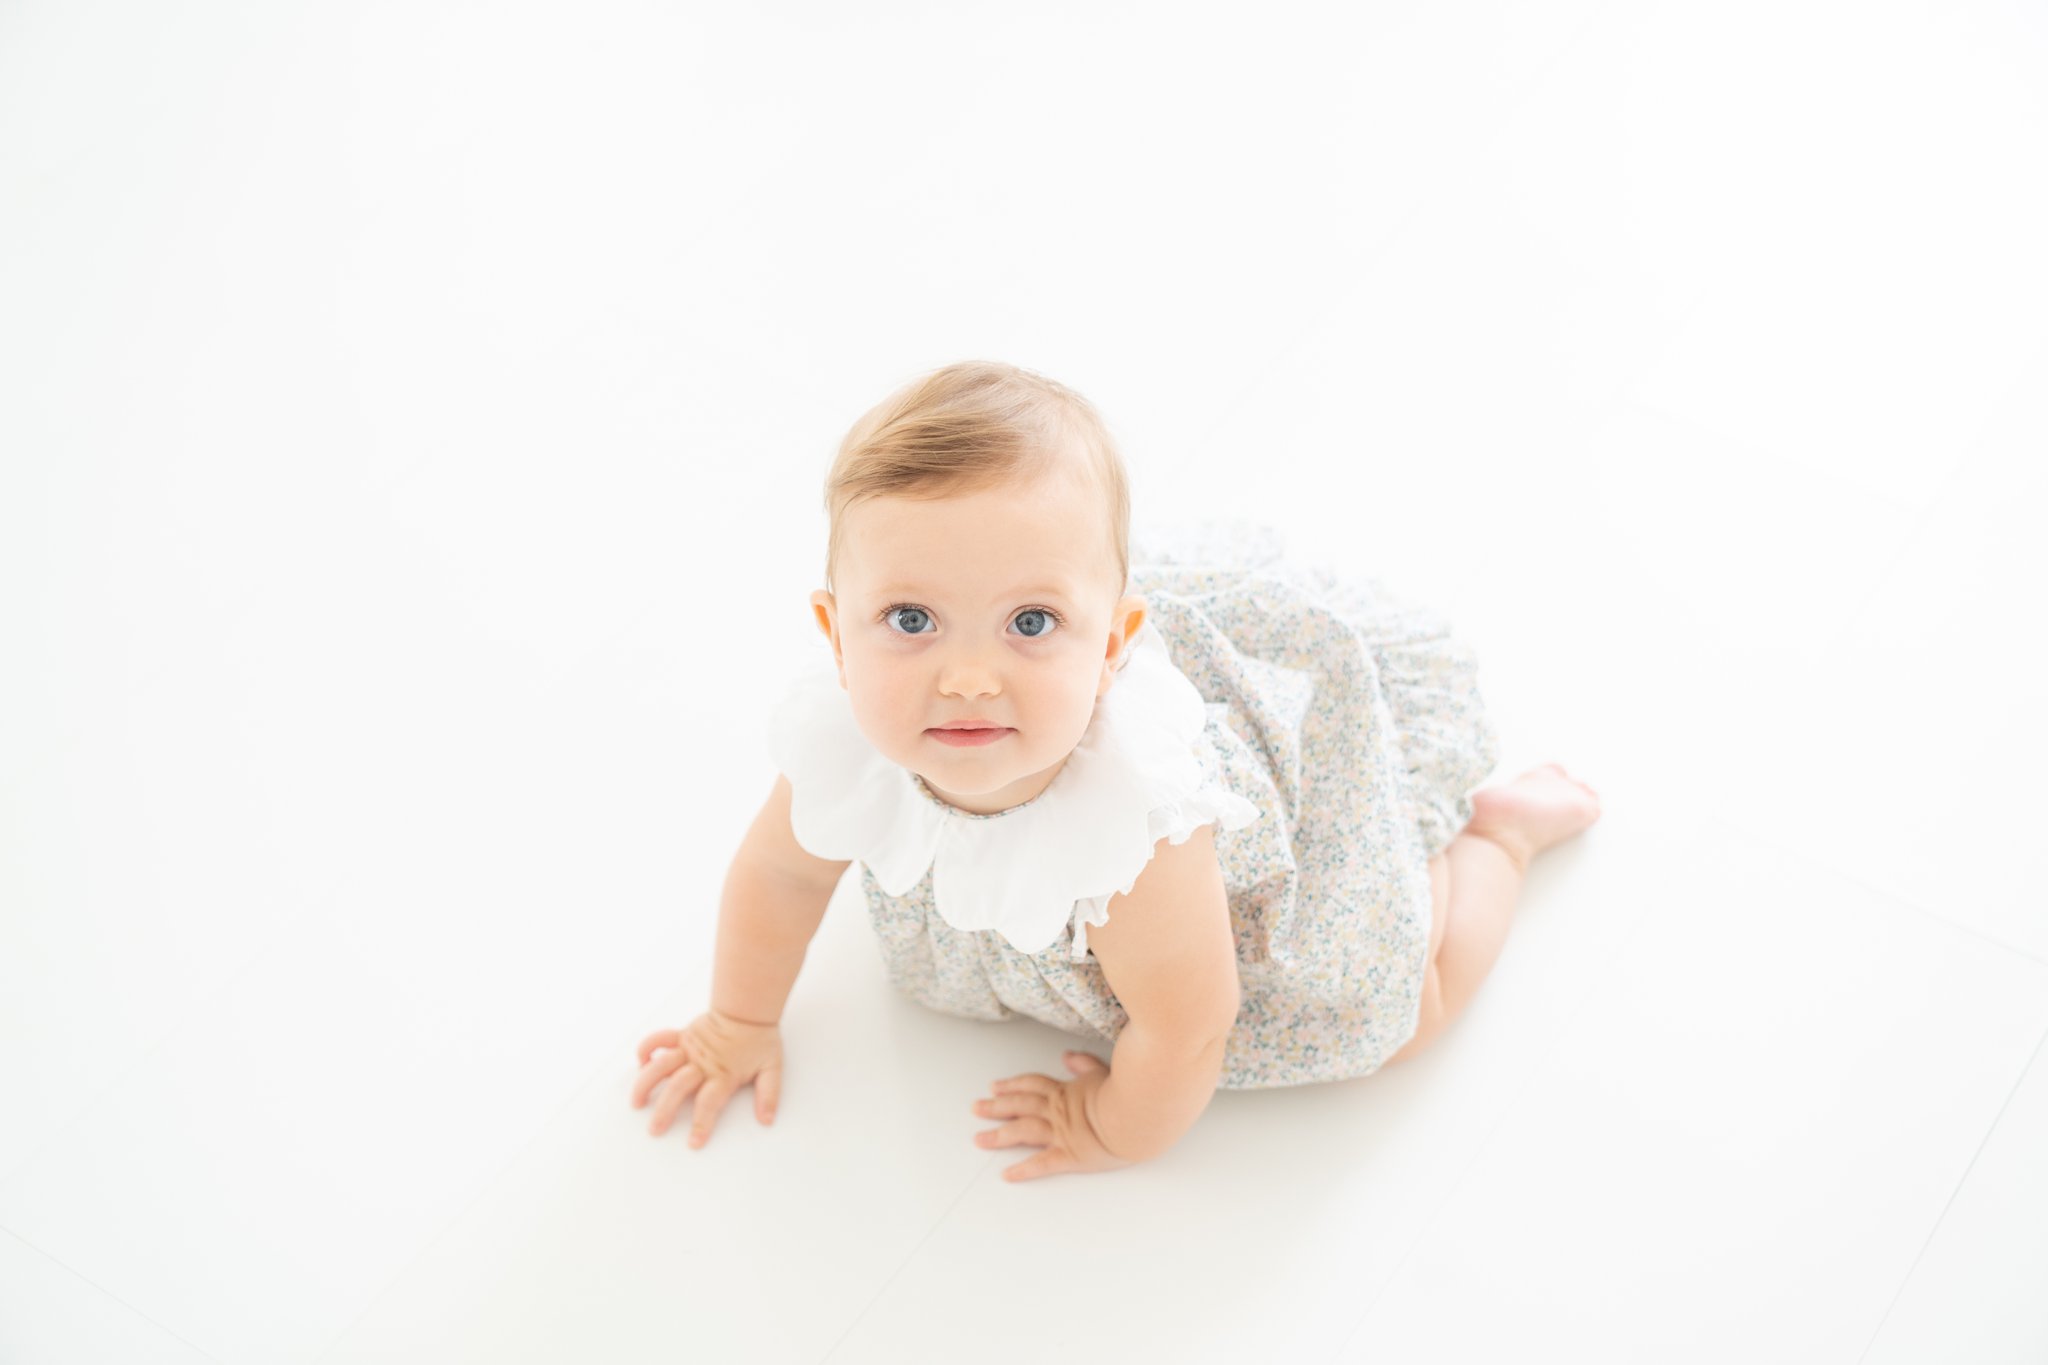 One Year old Baby girl's birthday photography ssession in Jupiter Fl studio